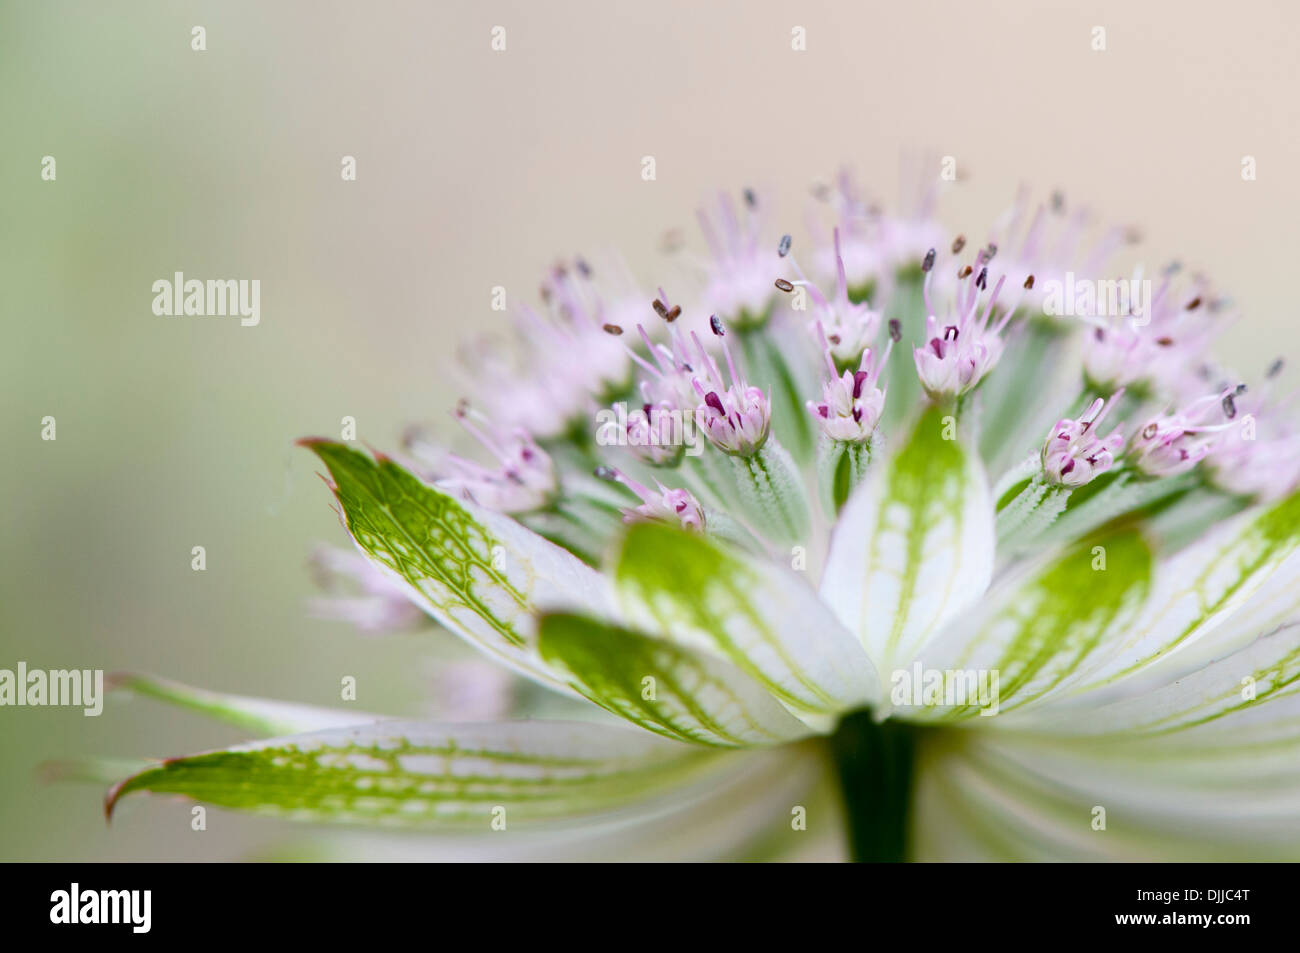 Close-up image of a single white/pink Astrantia major flower commonly known as Masterwort, image taken against a soft background Stock Photo